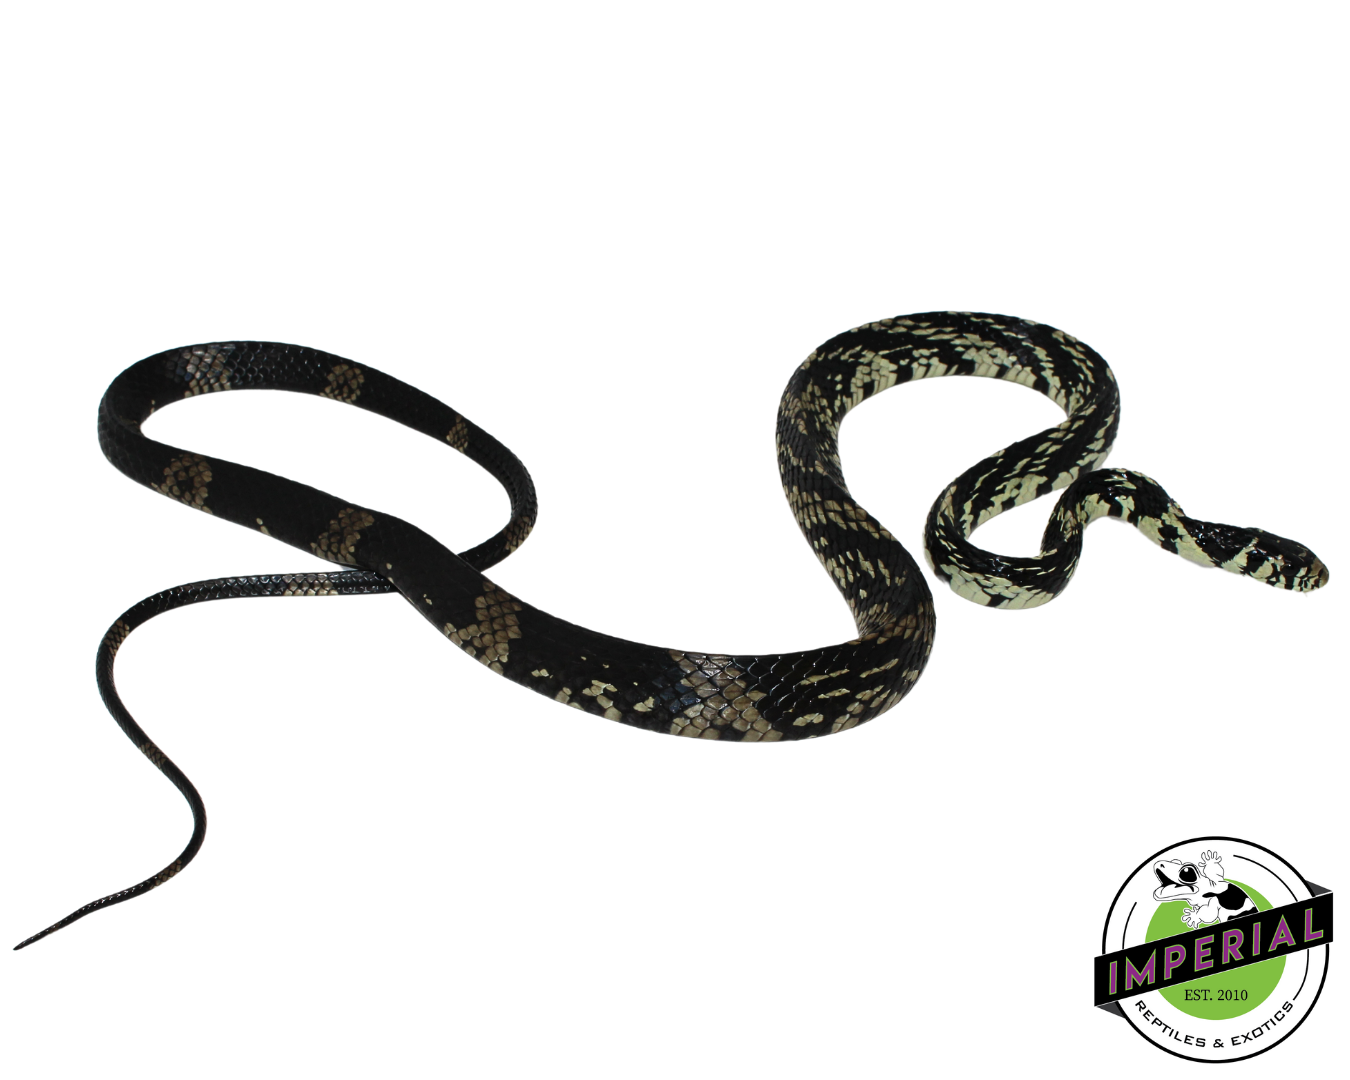 Tiger Rat Snake for sale, reptiles for sale, buy animals online